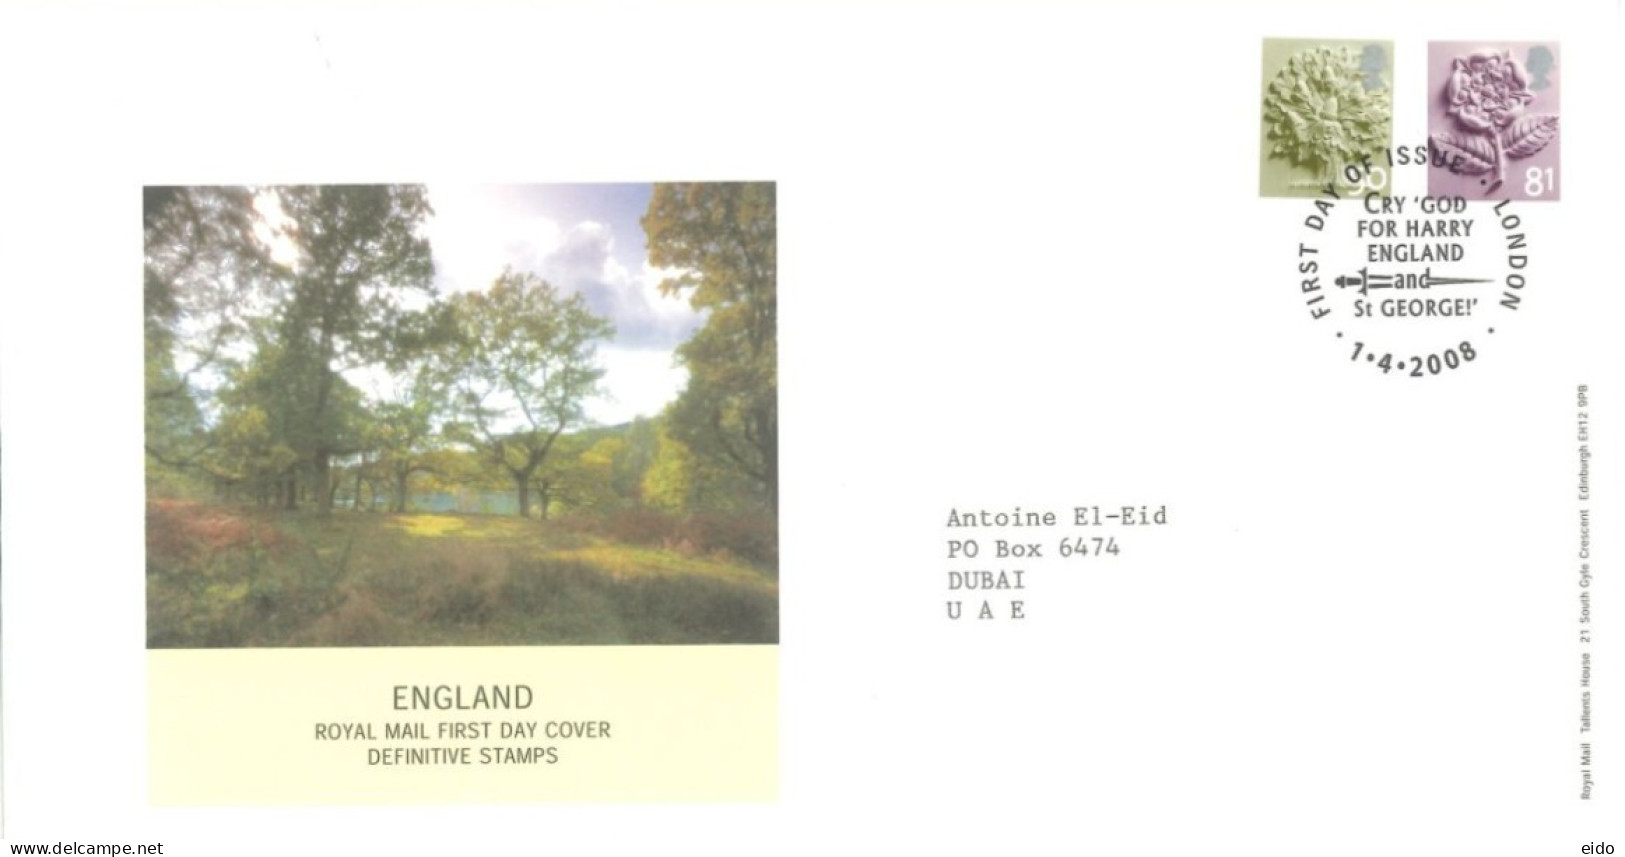 GREAT BRITAIN - 2008, FDC OF ENGLAND ROYAL MAIL DEFINITIVE STAMPS. - Lettres & Documents